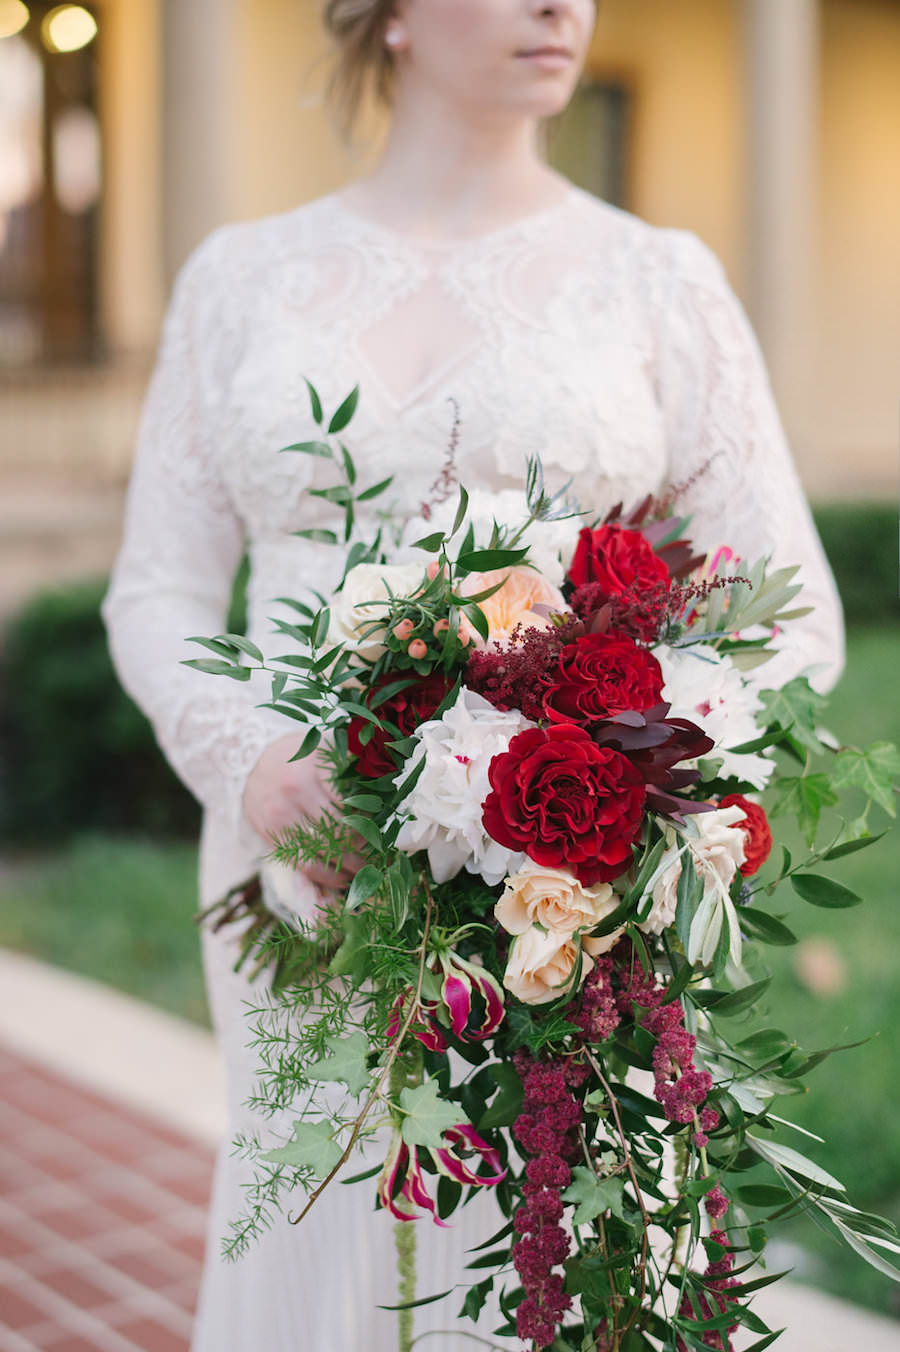 Bridal Portrait in Lace Long Sleeved White Wedding Dress with Pleated Bottom and Fall Inspired Bouquet of Red, Fuchsia, Ivory and Peach Florals with Greenery